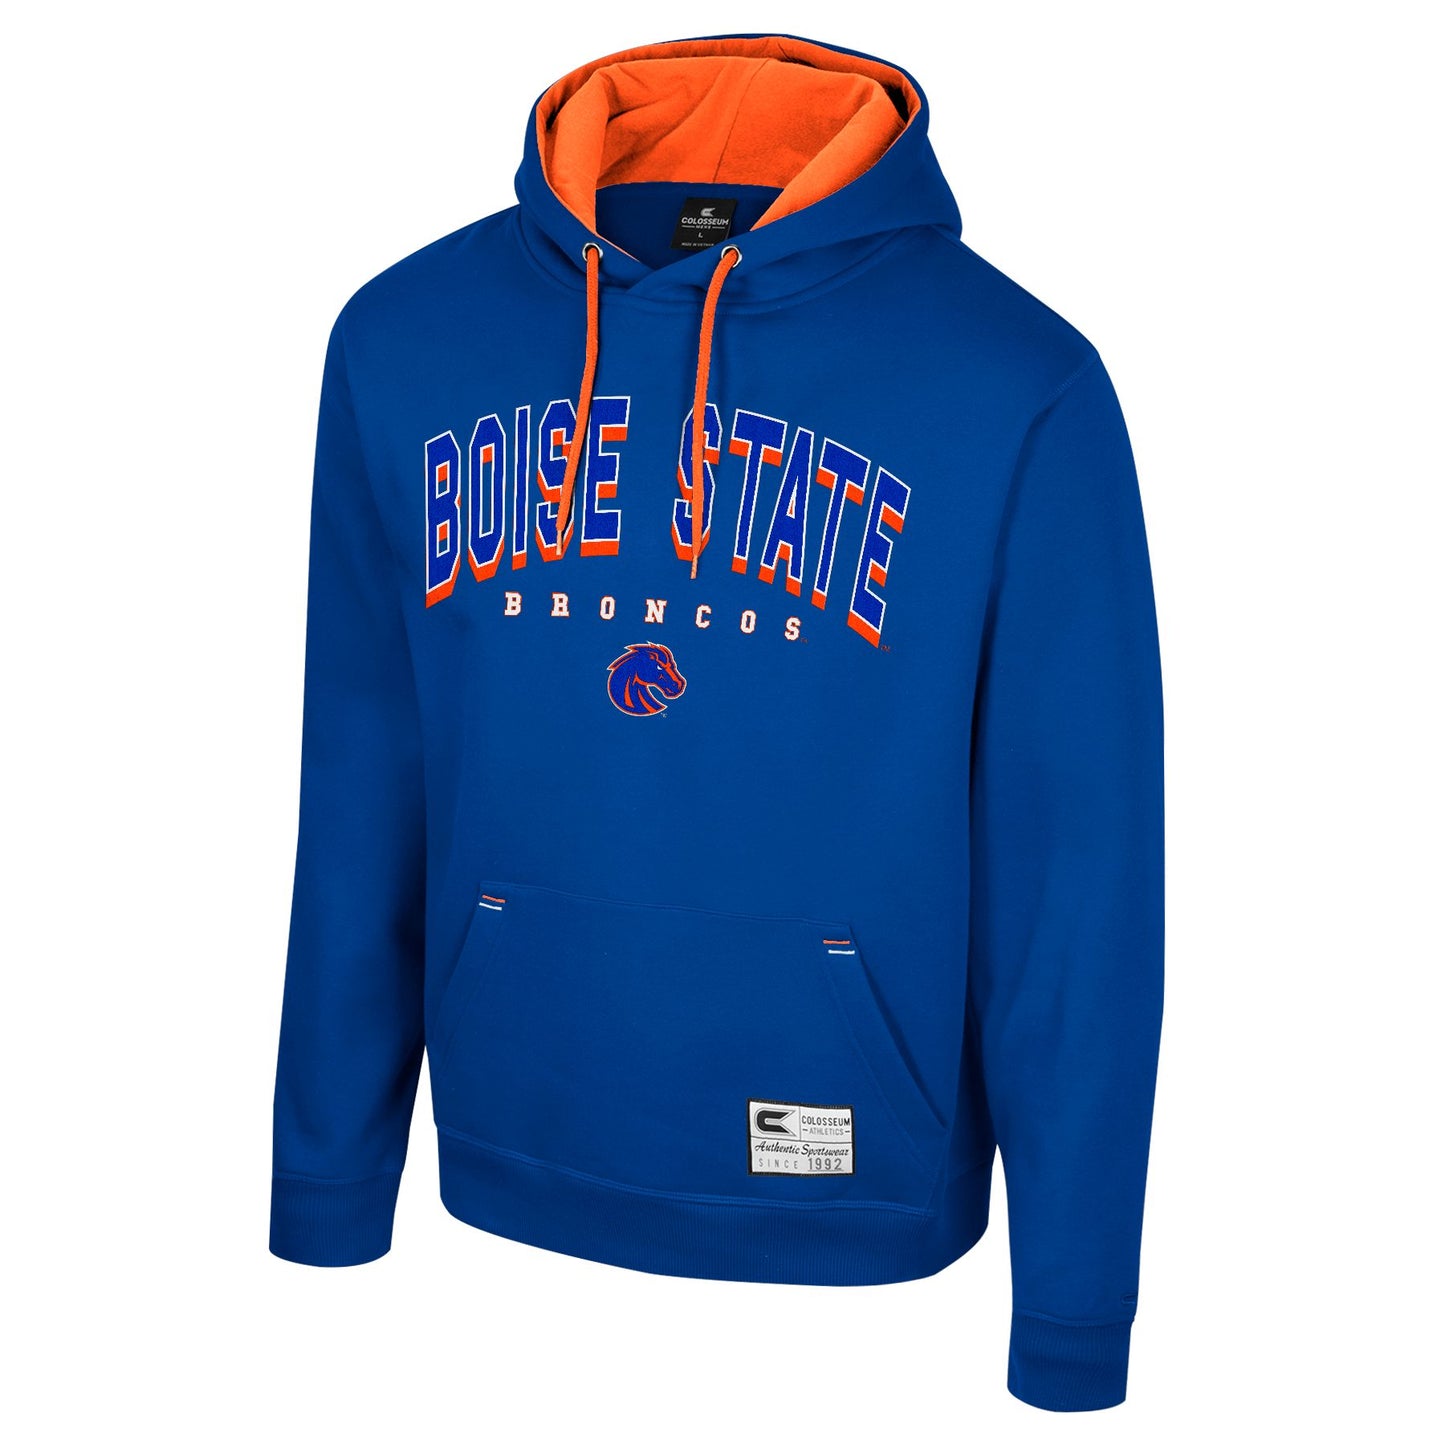 Boise State Broncos Men's Colosseum Pullover Hoodie (Blue)